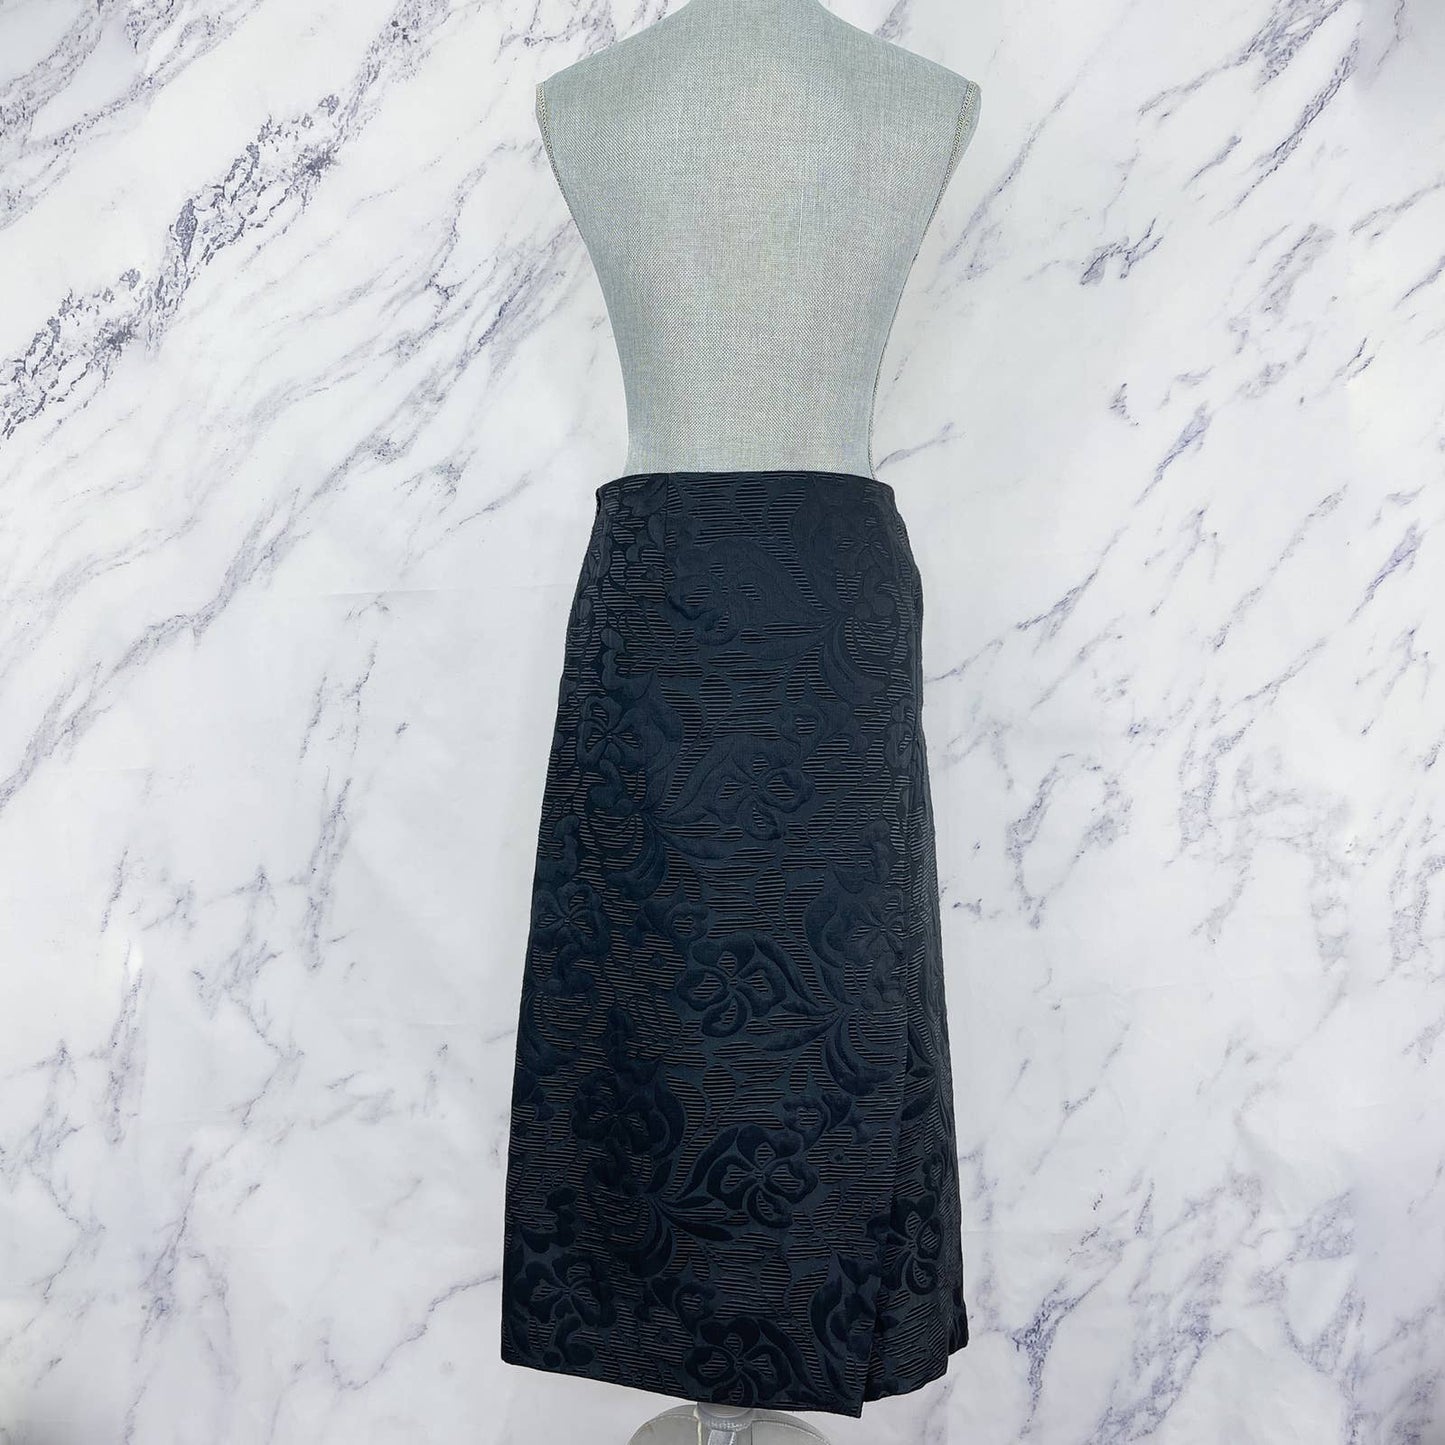 Theory | Anneal Aster Jacquard A-Line Skirt | Sz 2